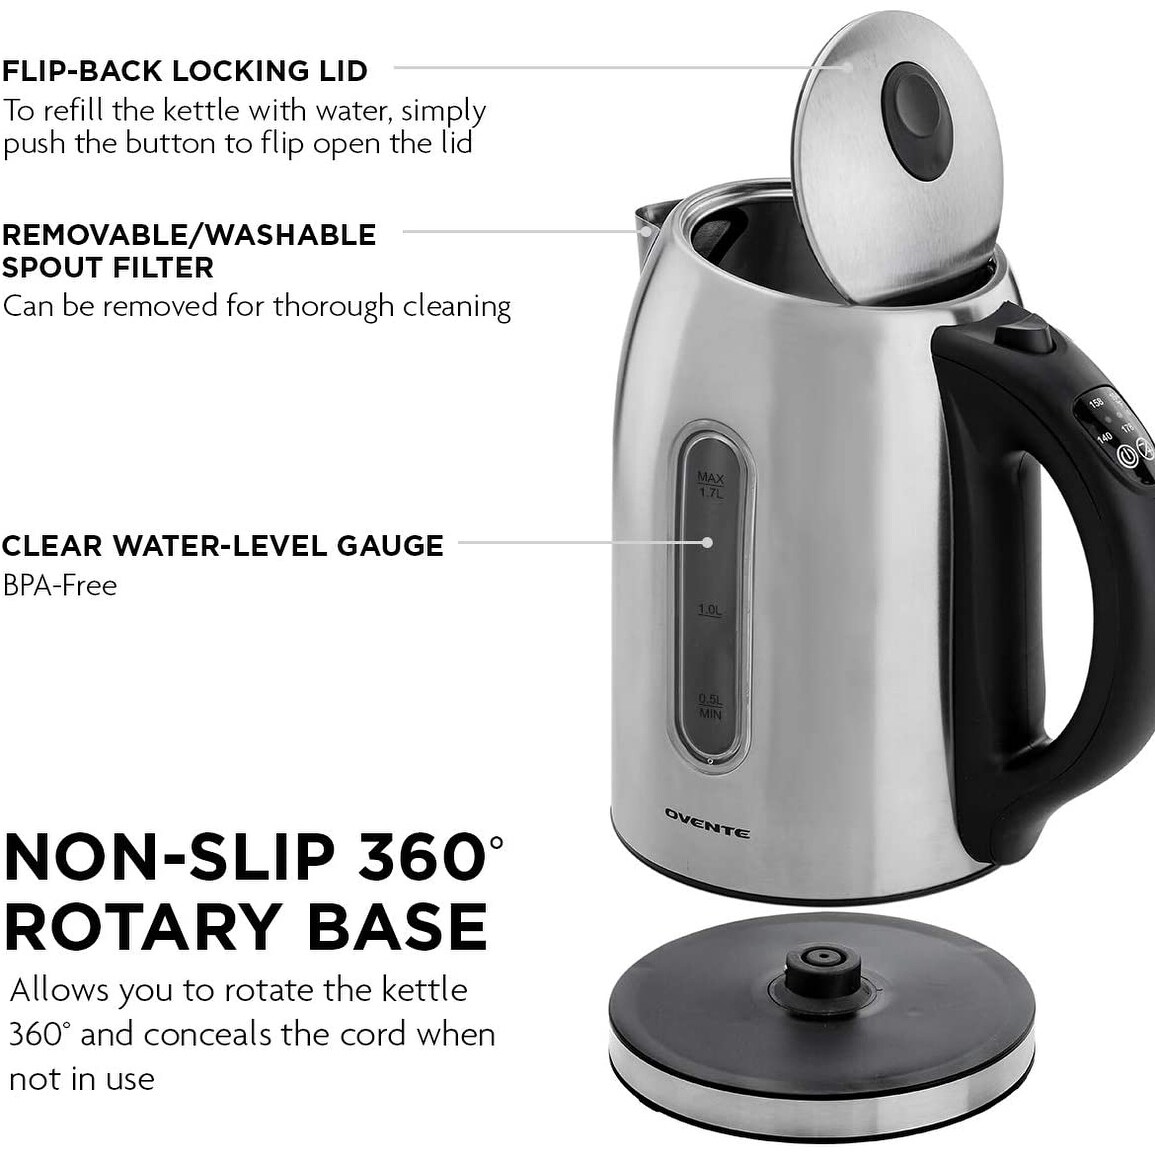 Ovente Electric Stainless Steel Hot Water Kettle 1.7 Liter with 5  Temperature Control & Concealed Heating Element, Silver - Bed Bath & Beyond  - 9796533